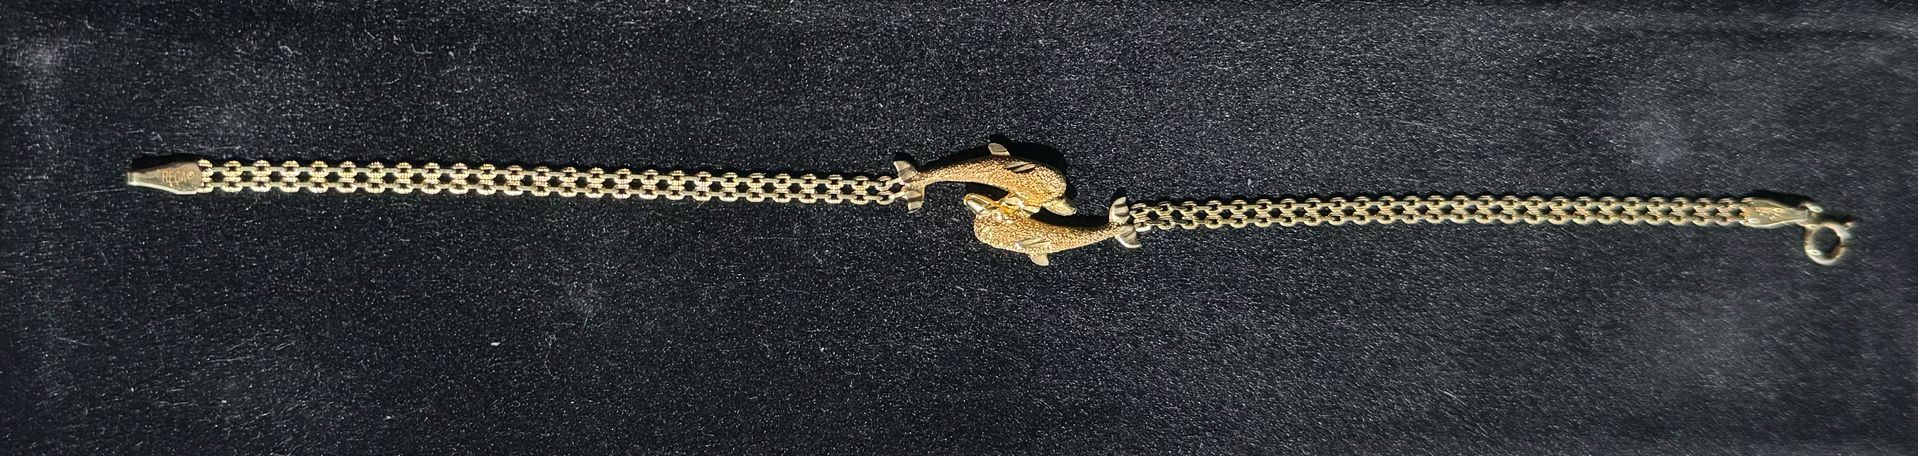 14K Gold  Double Chain Bracelet with Two Dolphins